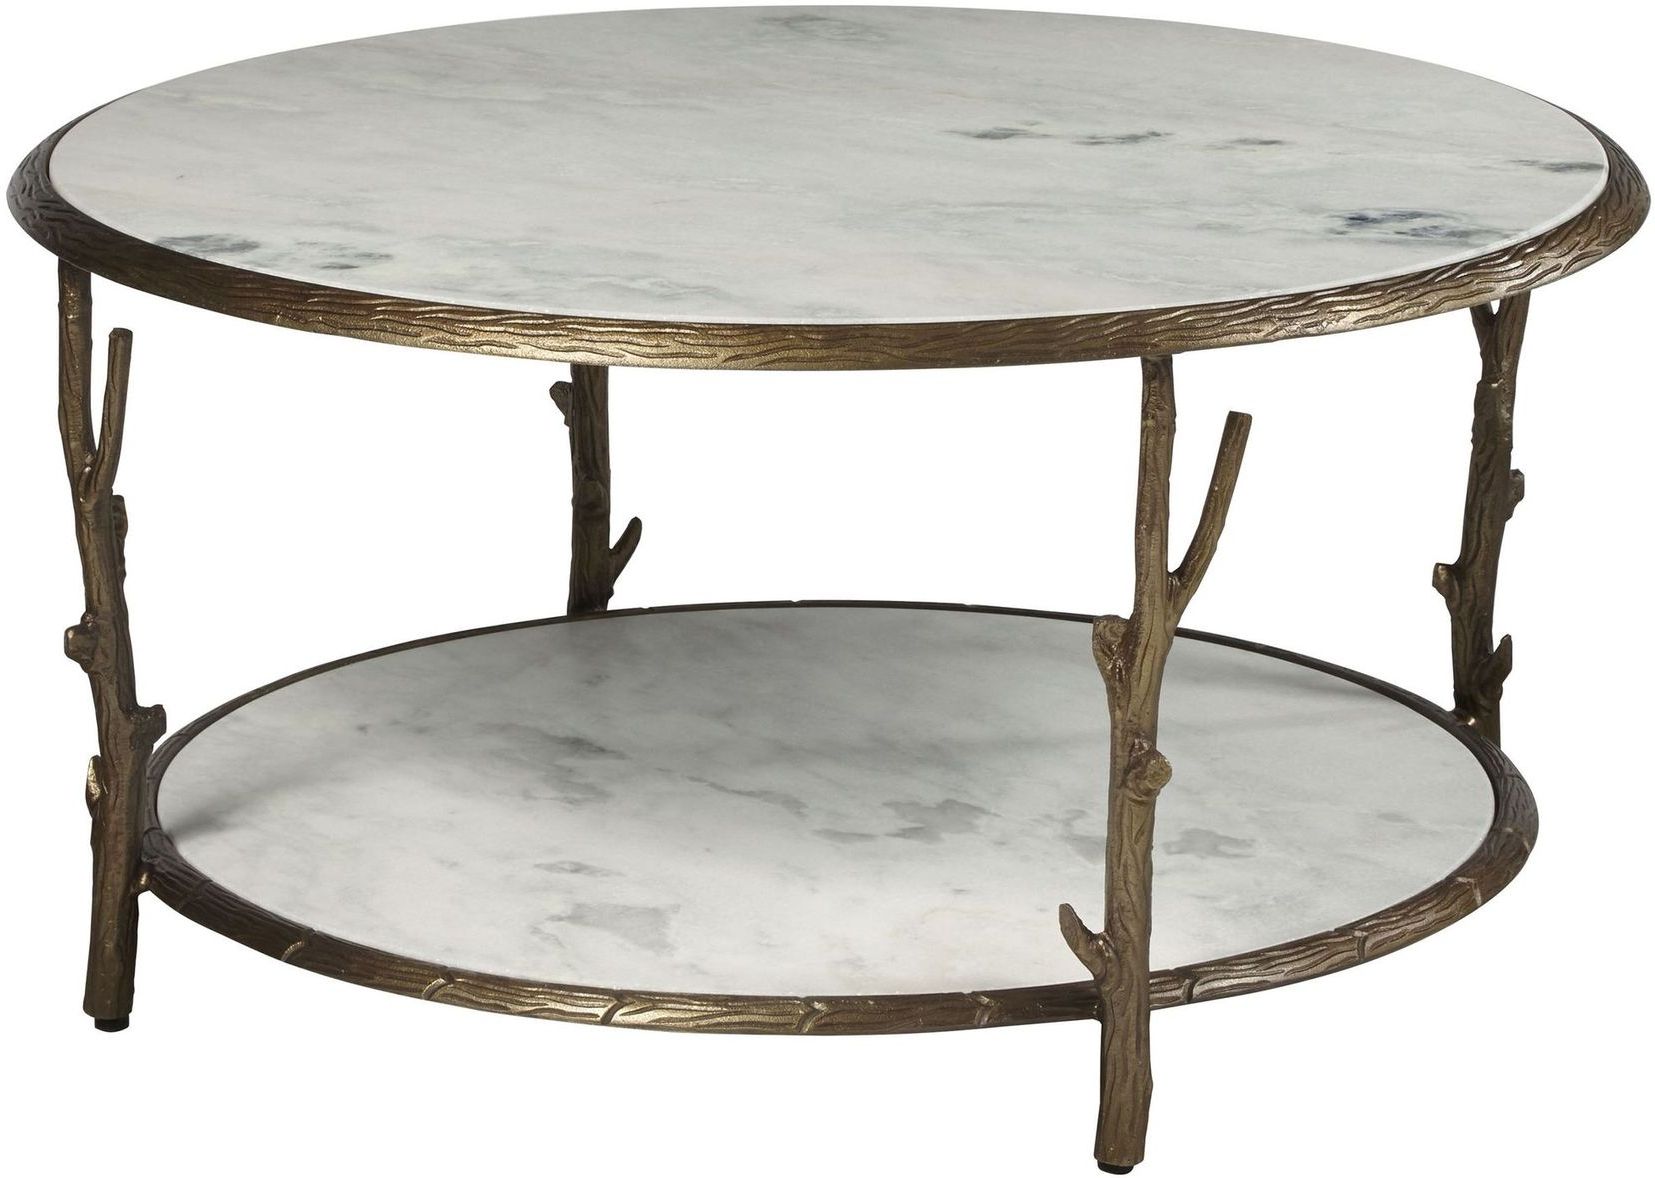 2019 Antique Cocktail Tables With Antique Accents Marble Brady Cocktail Table 2 Piece Set (Gallery 10 of 20)